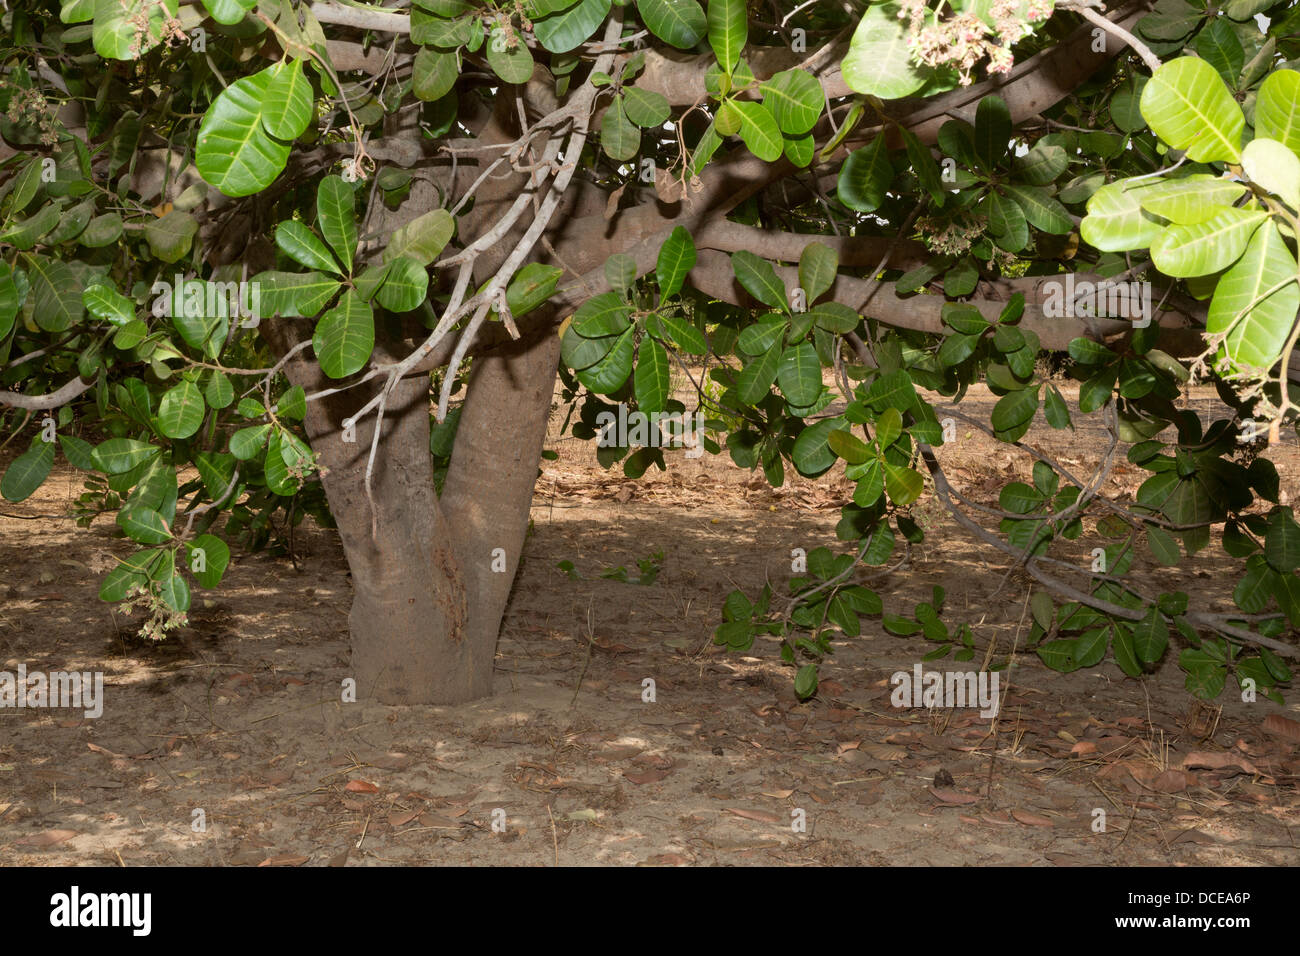 Example of a Less Well-tended Cashew Tree Farm, with less pruning of lower limbs, less clearing of under brush. Stock Photo